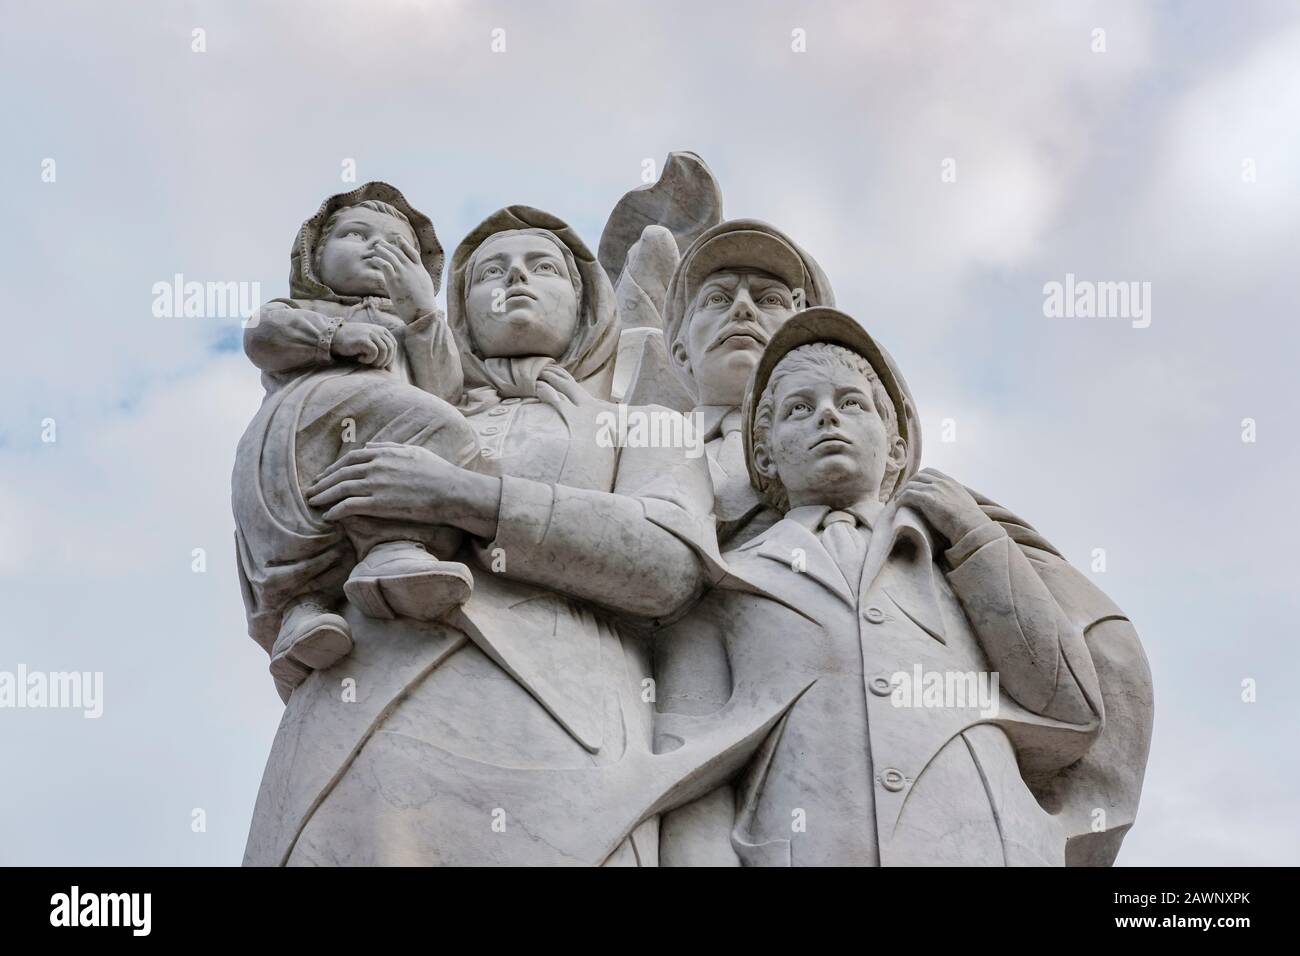 Monument to the Immigrant marble statue by Italian sculptor Franco Alessandrini, Waldenberg Riverfront Park, River Walk, New Orleans, Louisiana, USA Stock Photo